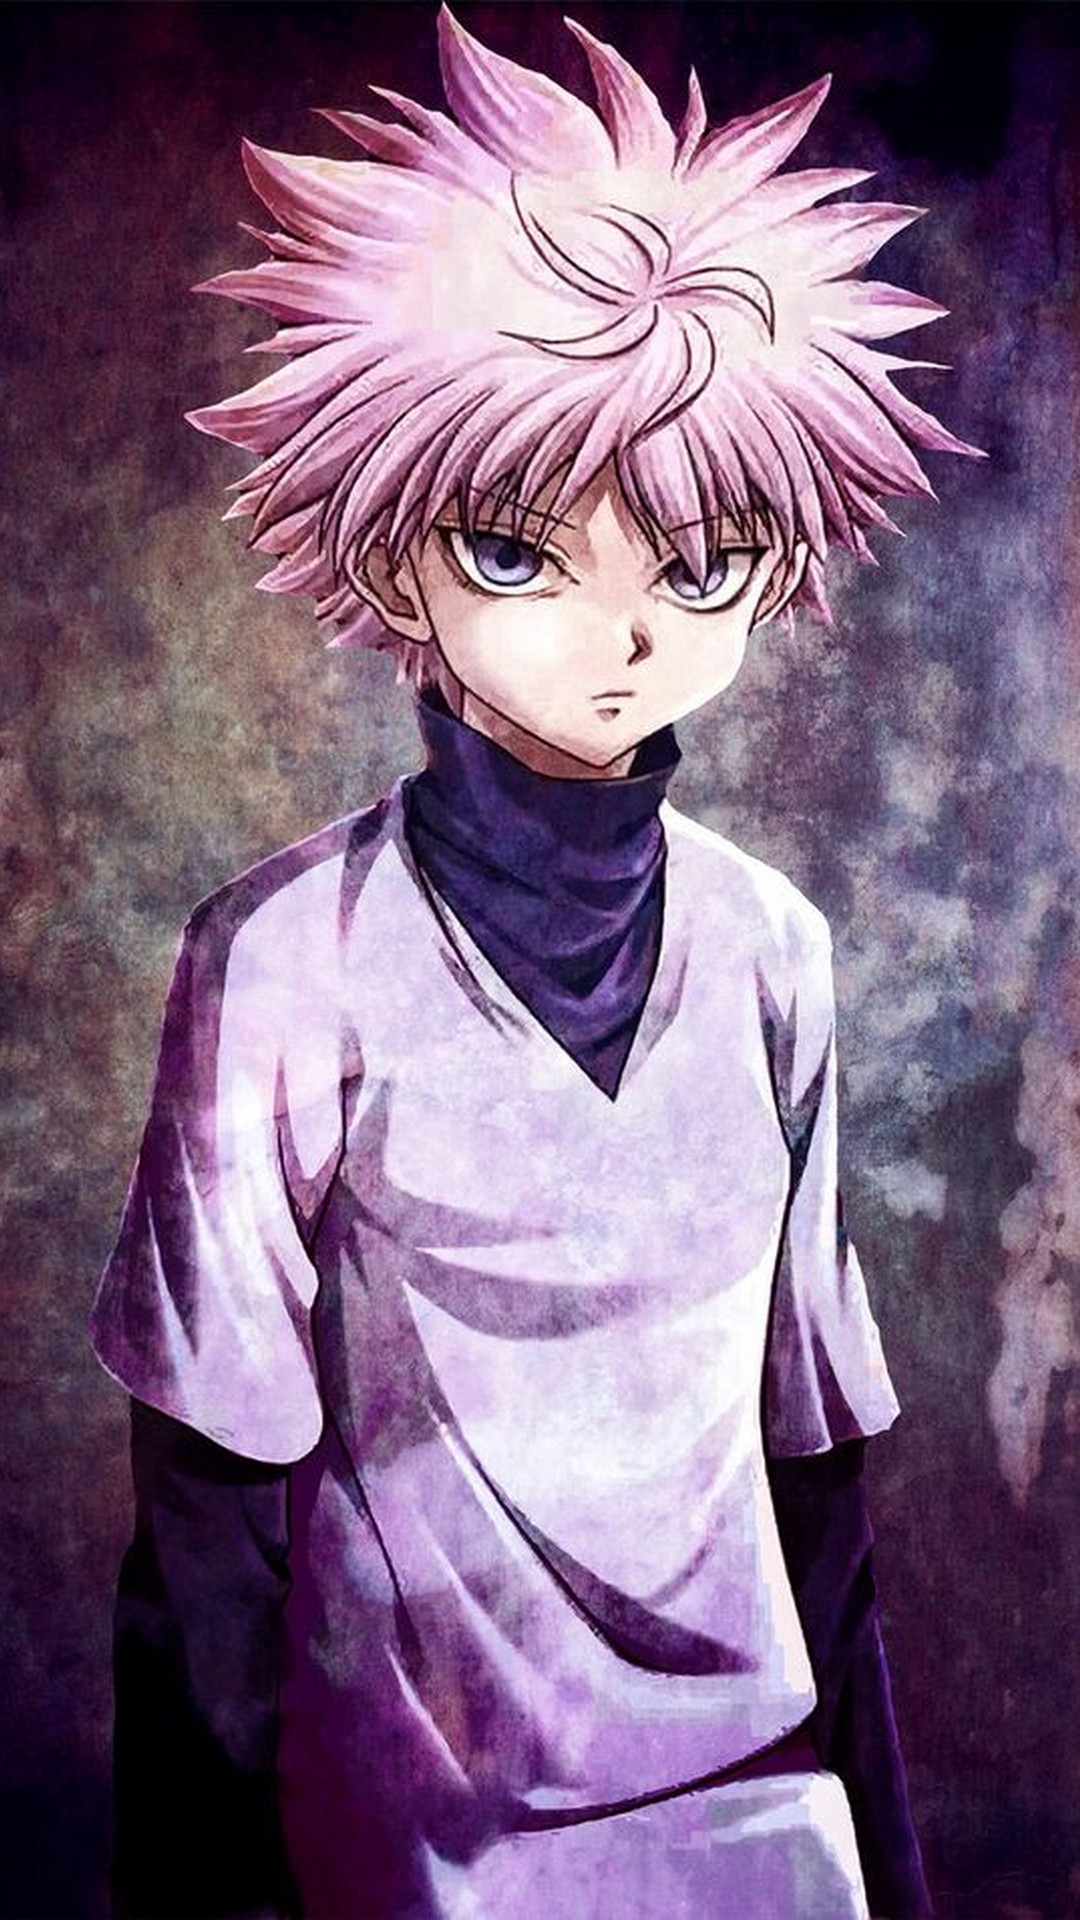 Killua iPhone Screen Lock Wallpaper With high-resolution 1080X1920 pixel. You can set as wallpaper for Apple iPhone X, XS Max, XR, 8, 7, 6, SE, iPad. Enjoy and share your favorite HD wallpapers and background images